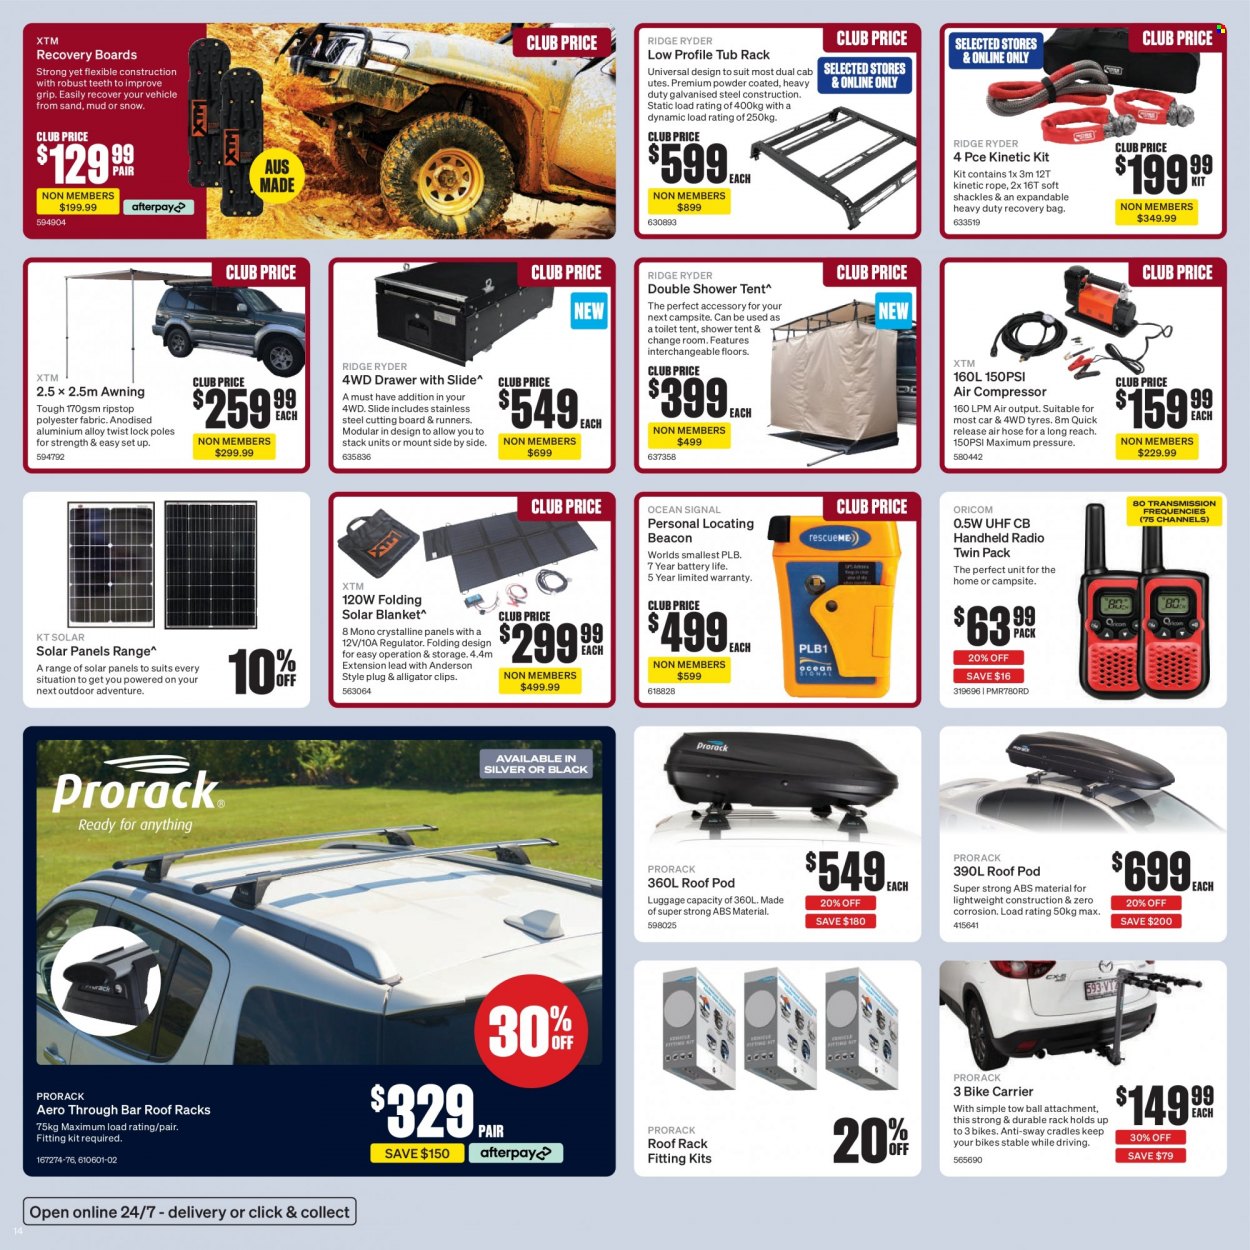 thumbnail - SuperCheap Auto mailer - 02.02.2023 - 12.02.2023 - Sales products - Ridge Ryder, cutting board, XTM, solar panel, solar blanket, air compressor, blanket, extension lead, air hose, recovery boards, bike carrier, roof rack, tires, bag, tent. Page 14.